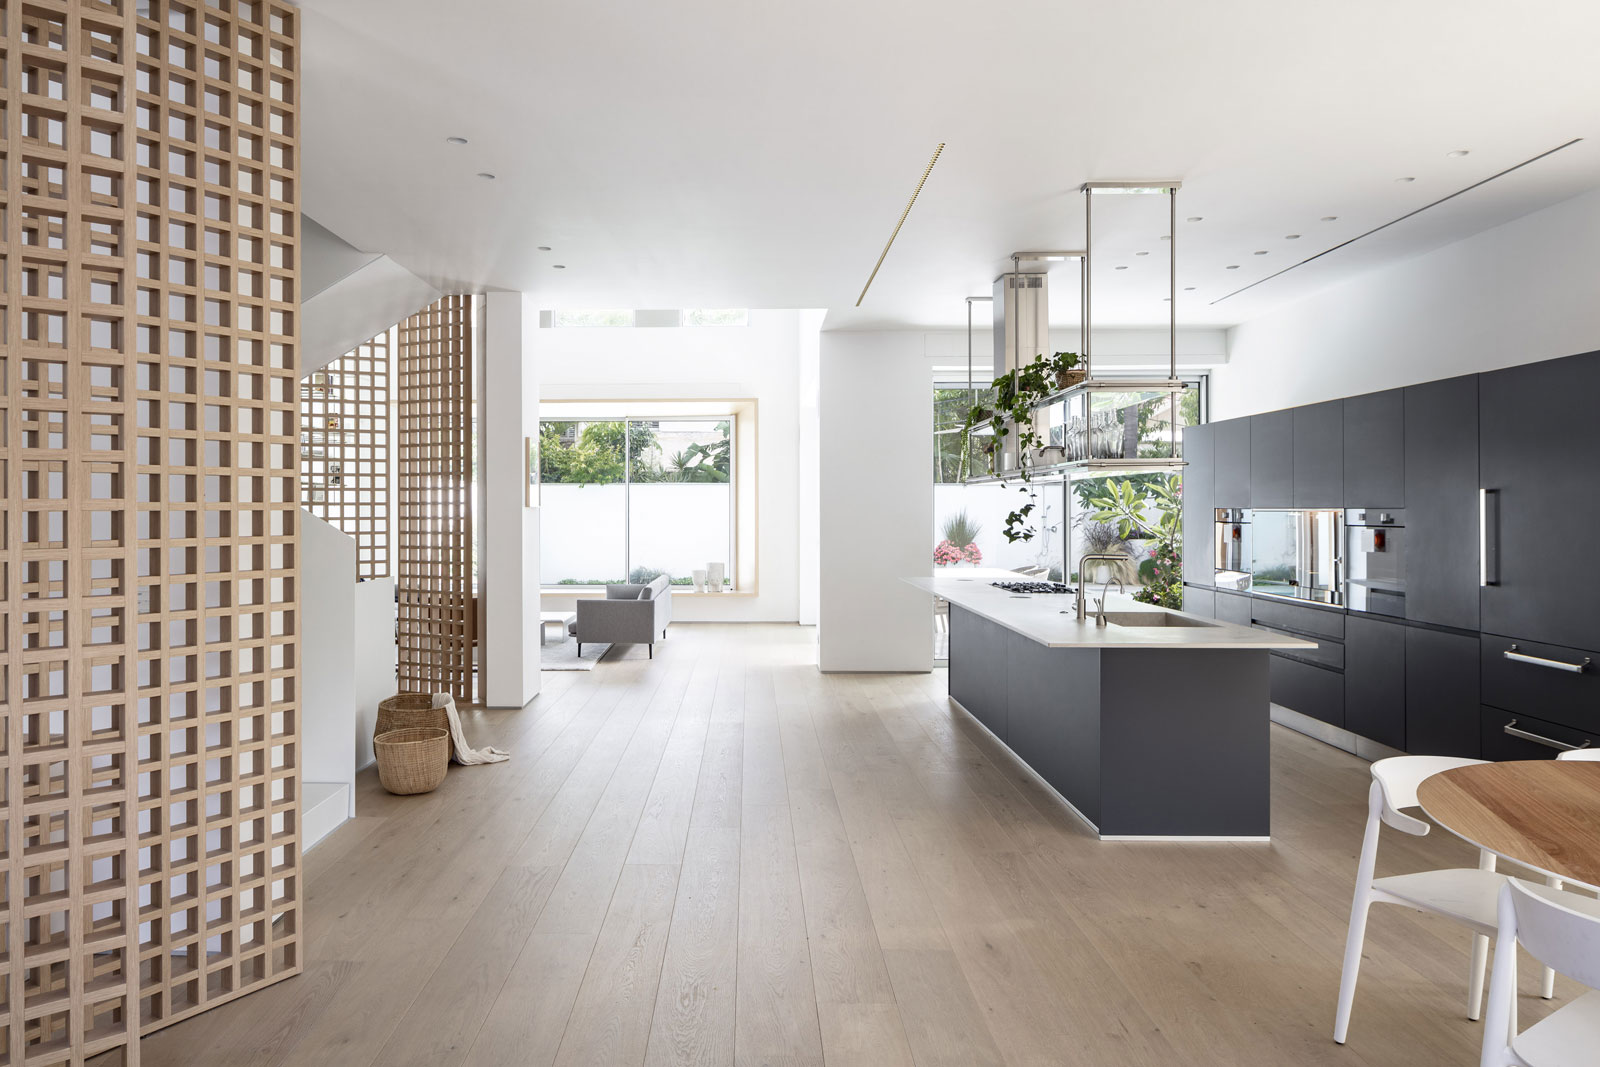 Vibia The Edit - Tel Aviv Designer Selects Structural for a Contemporary Residence